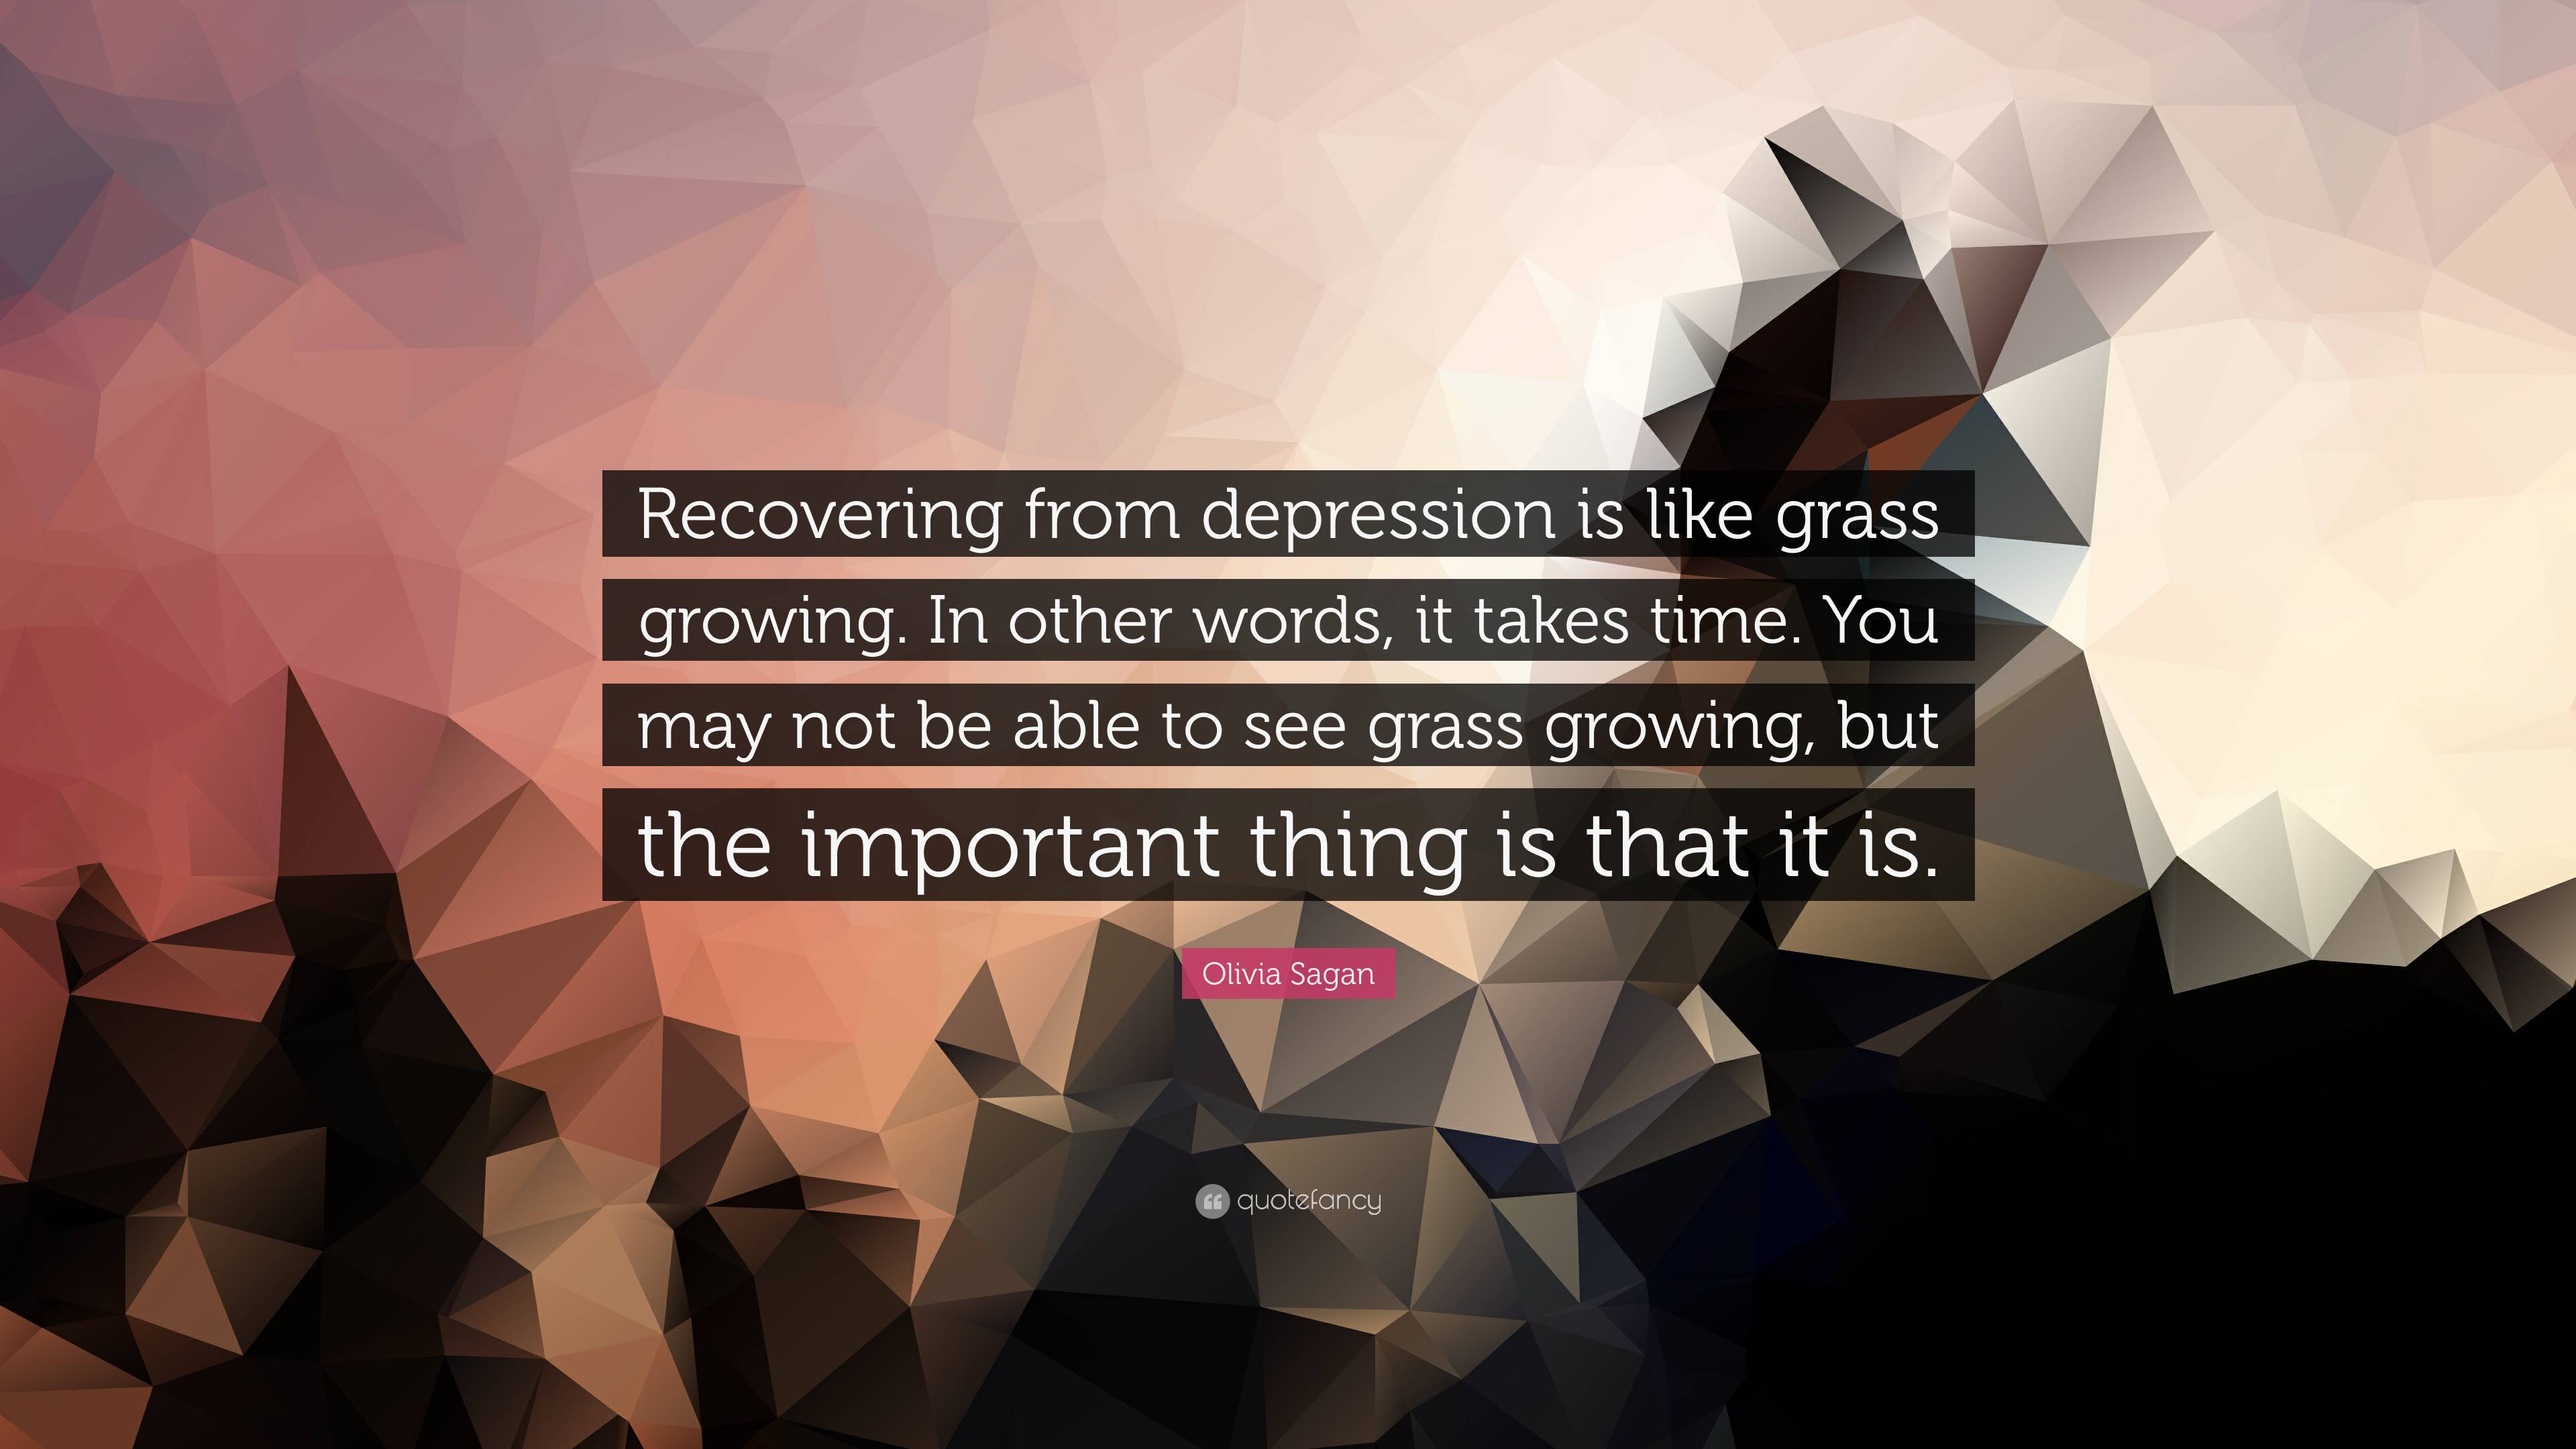 Olivia Sagan Quote: “Recovering from depression is like grass growing ...